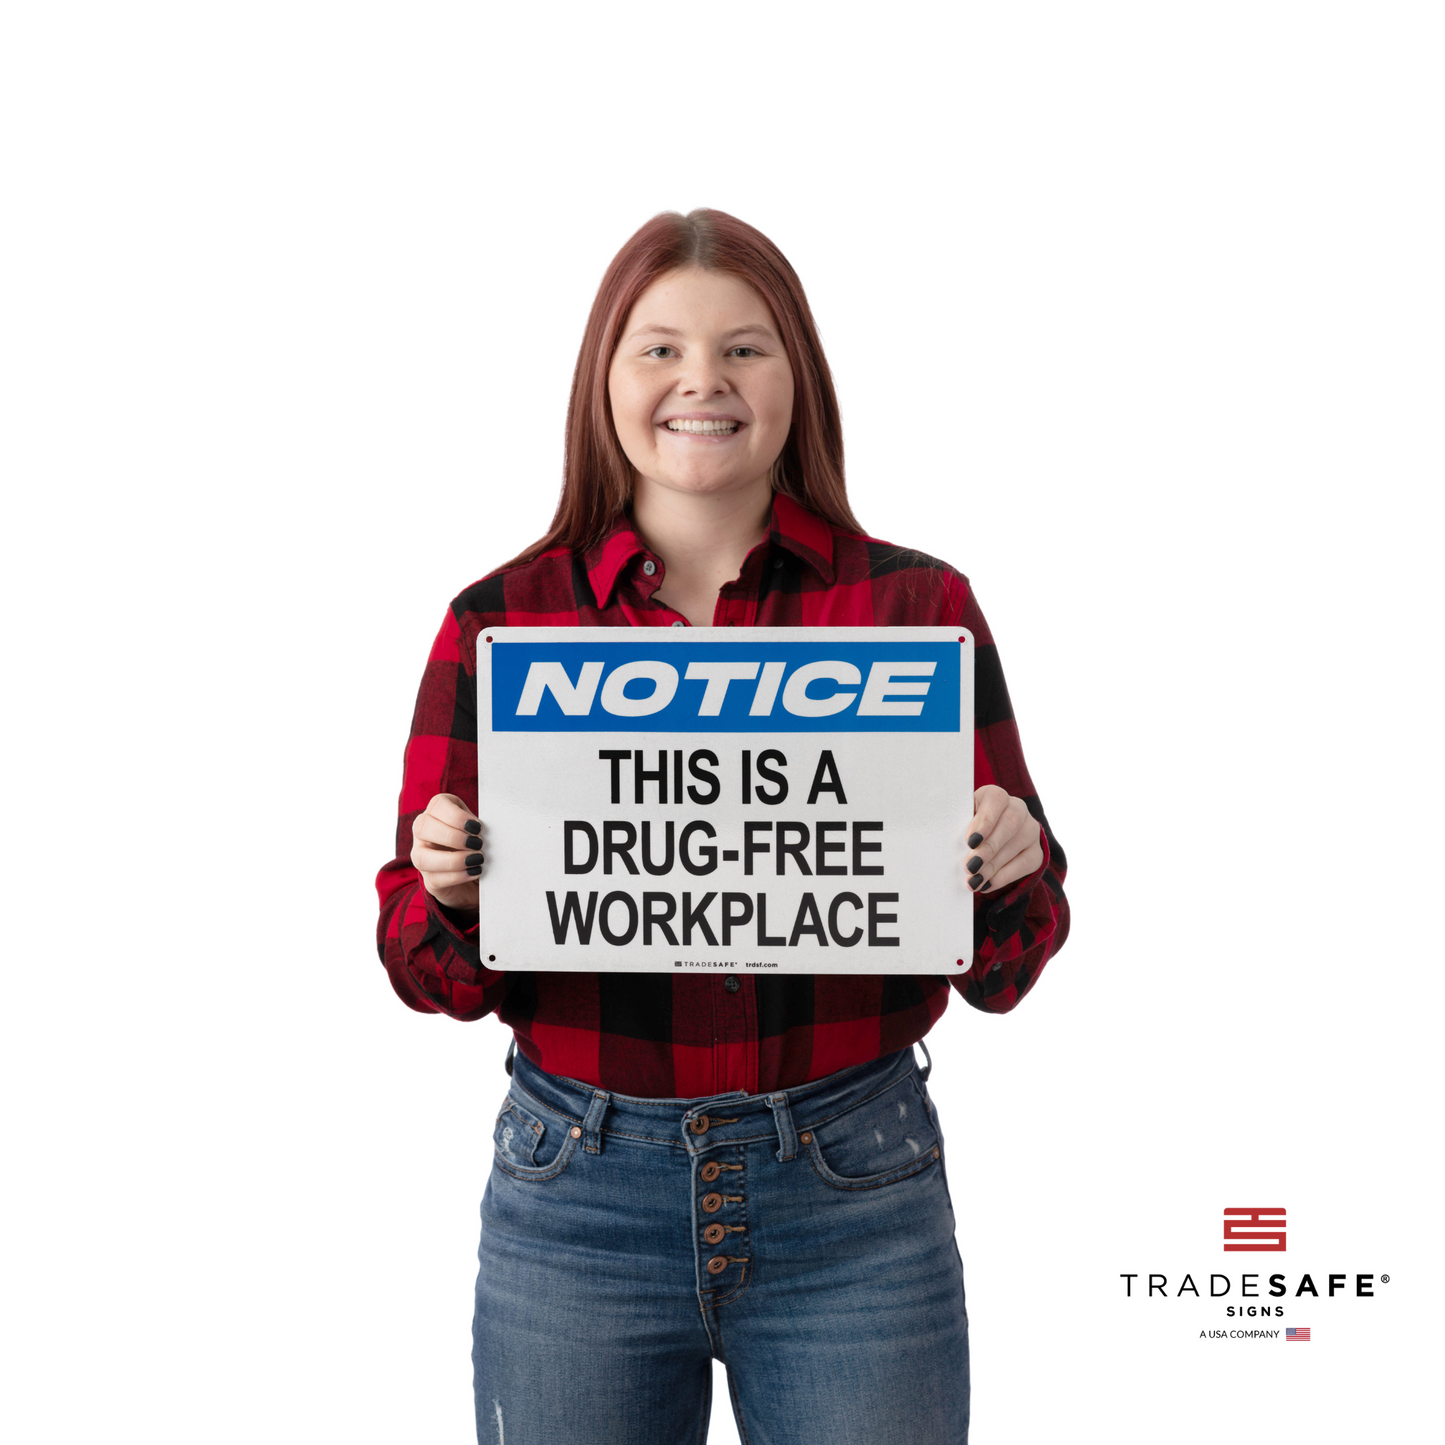 a person holding a notice sign with the text “this is a drug-free workplace”